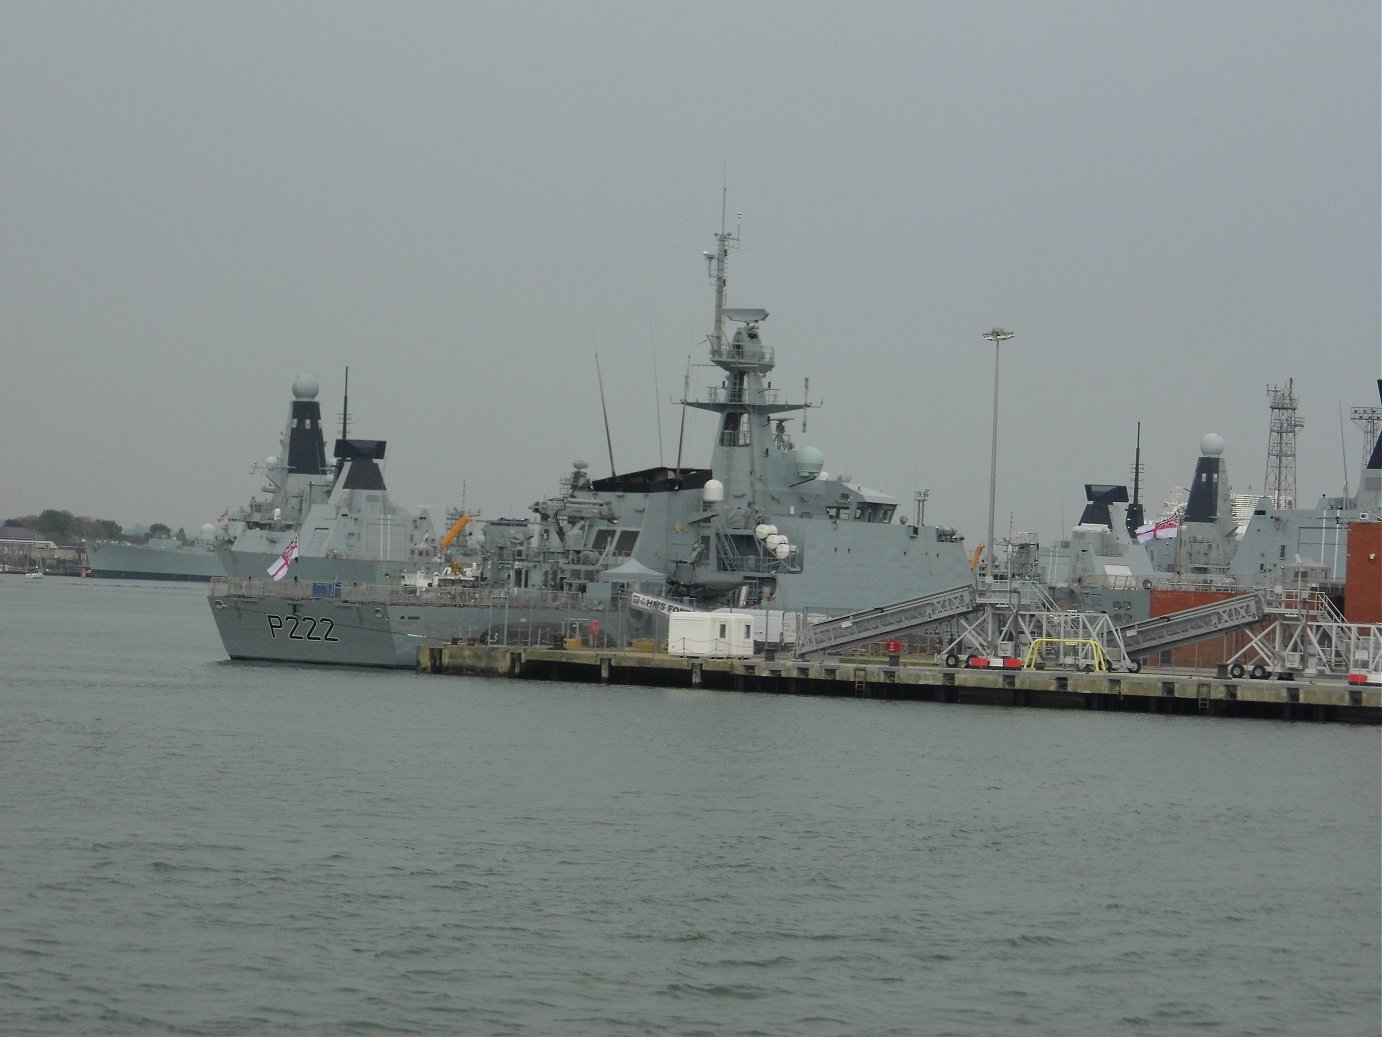 River class offshore patrol vessel H.M.S. Forth at Portsmouth Naval Base 23 April 2019